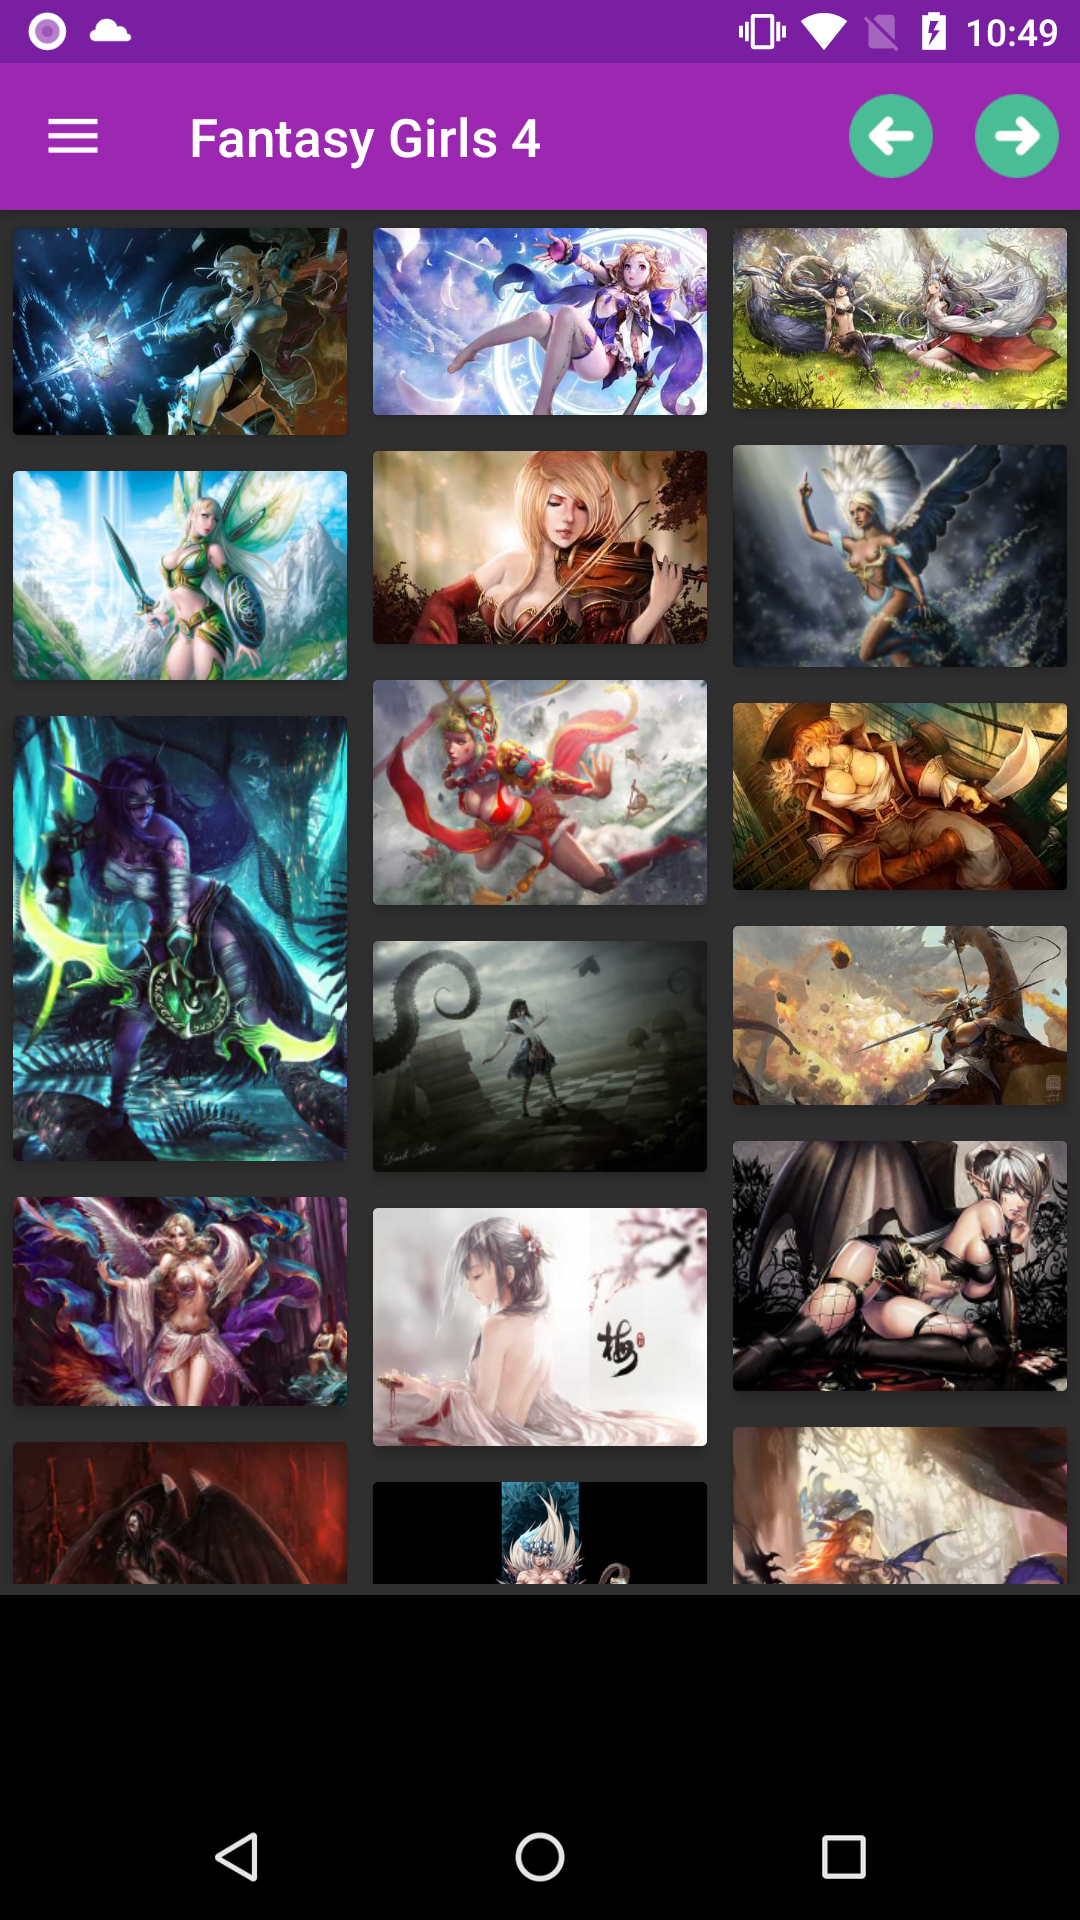 Fantasy Girls wallpapers henatai,image,girls,sexy,pics,pic,adult,wallpapers,hentai,free,gallery,apk,apps,photo,anime,backgrounds,collections,android,fantasy,picture,app